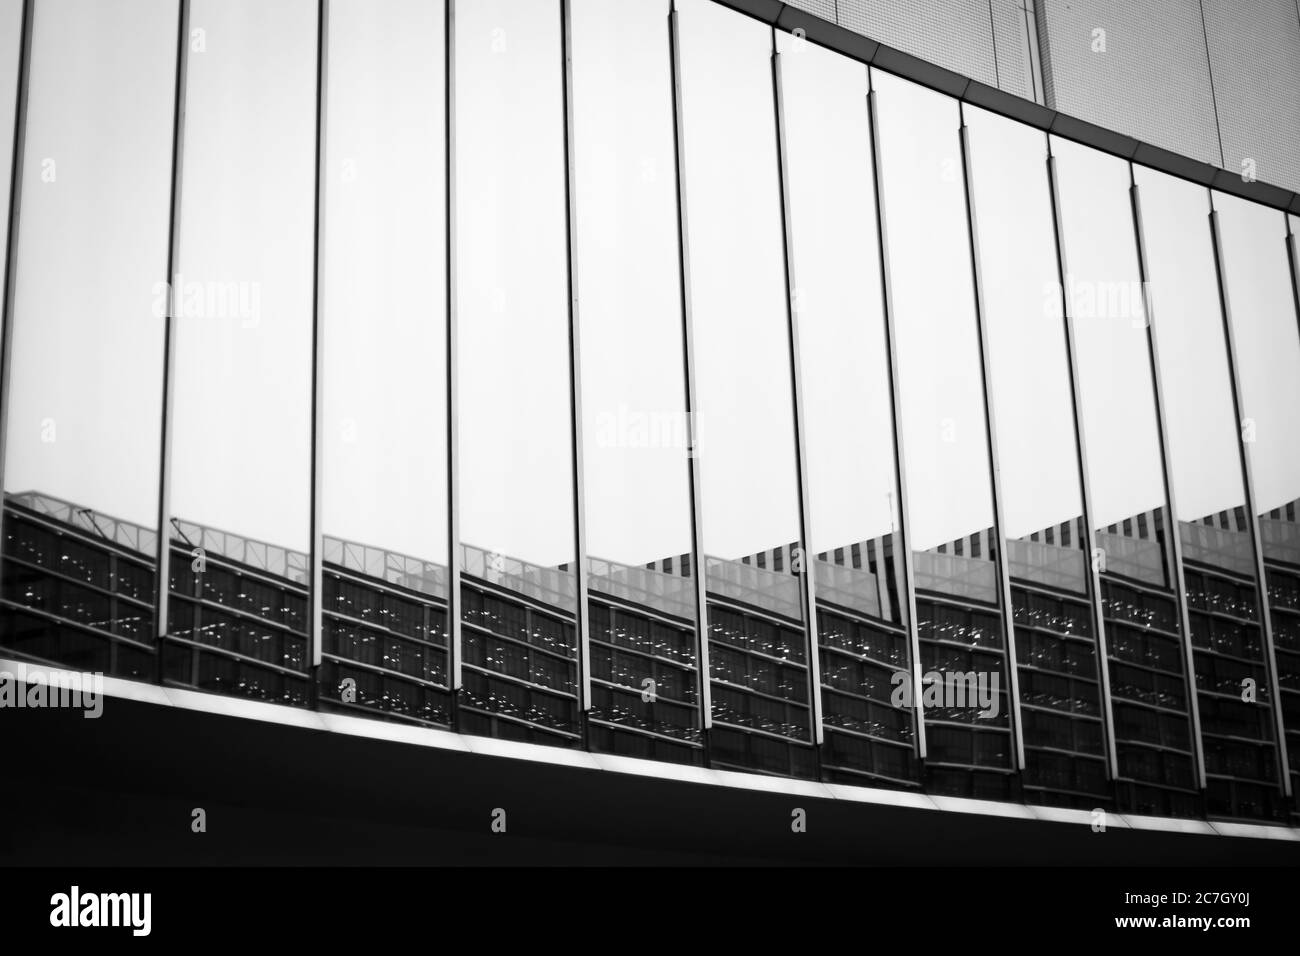 Reflection on the curved glass of the modern building. Black and White. Landscape orientation. Stock Photo